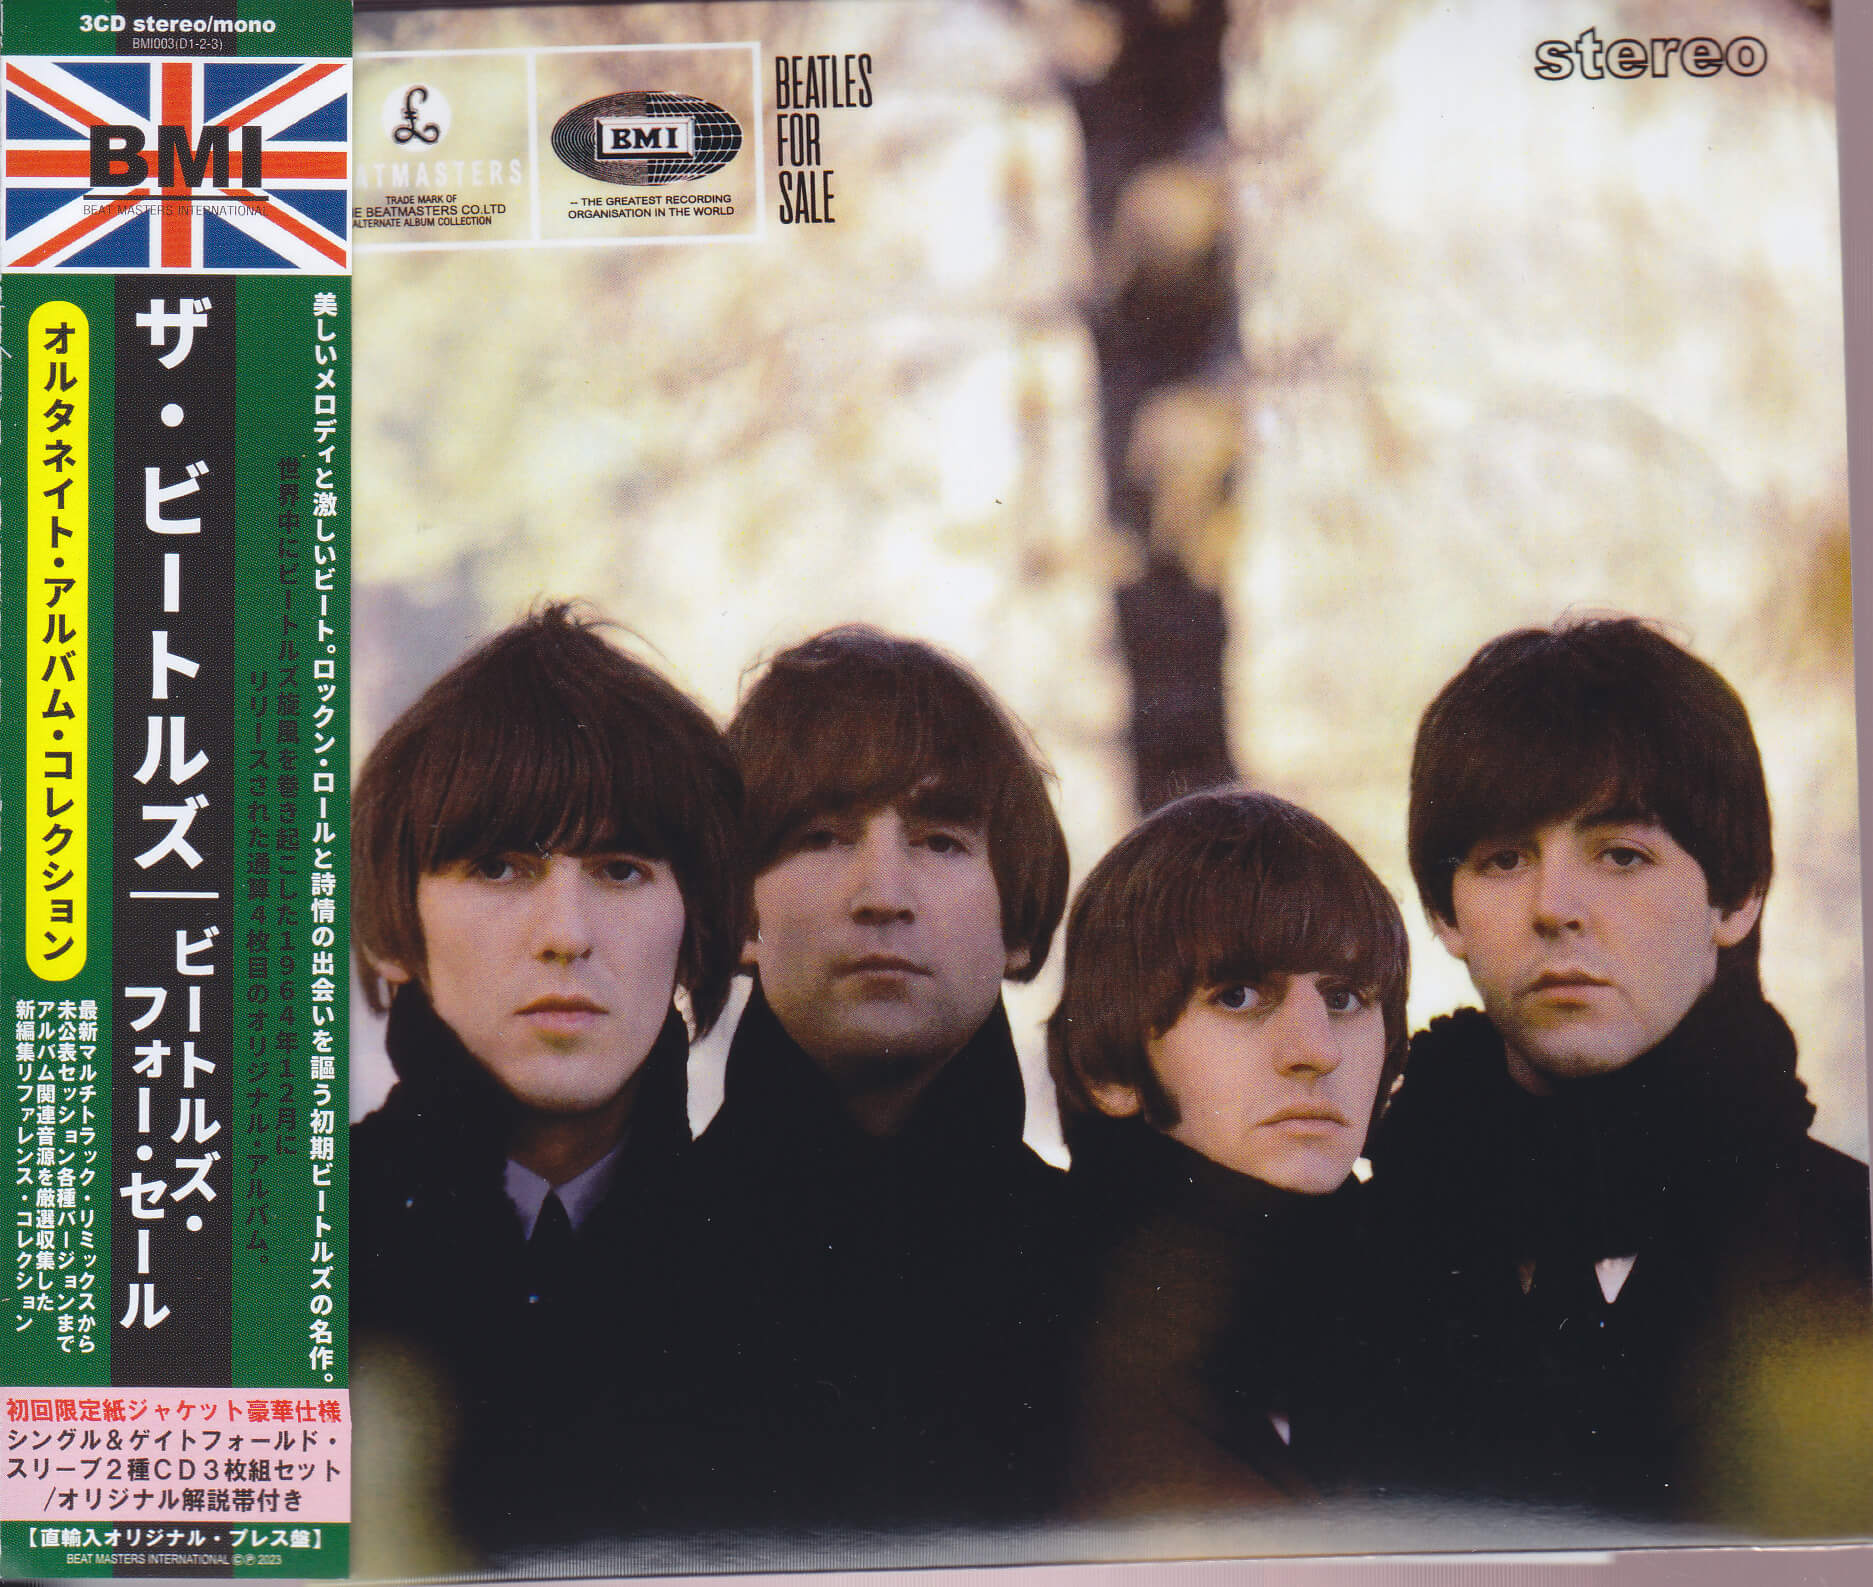 Beatles / Beatles For Sale The Alternate Album Collection / 3CD